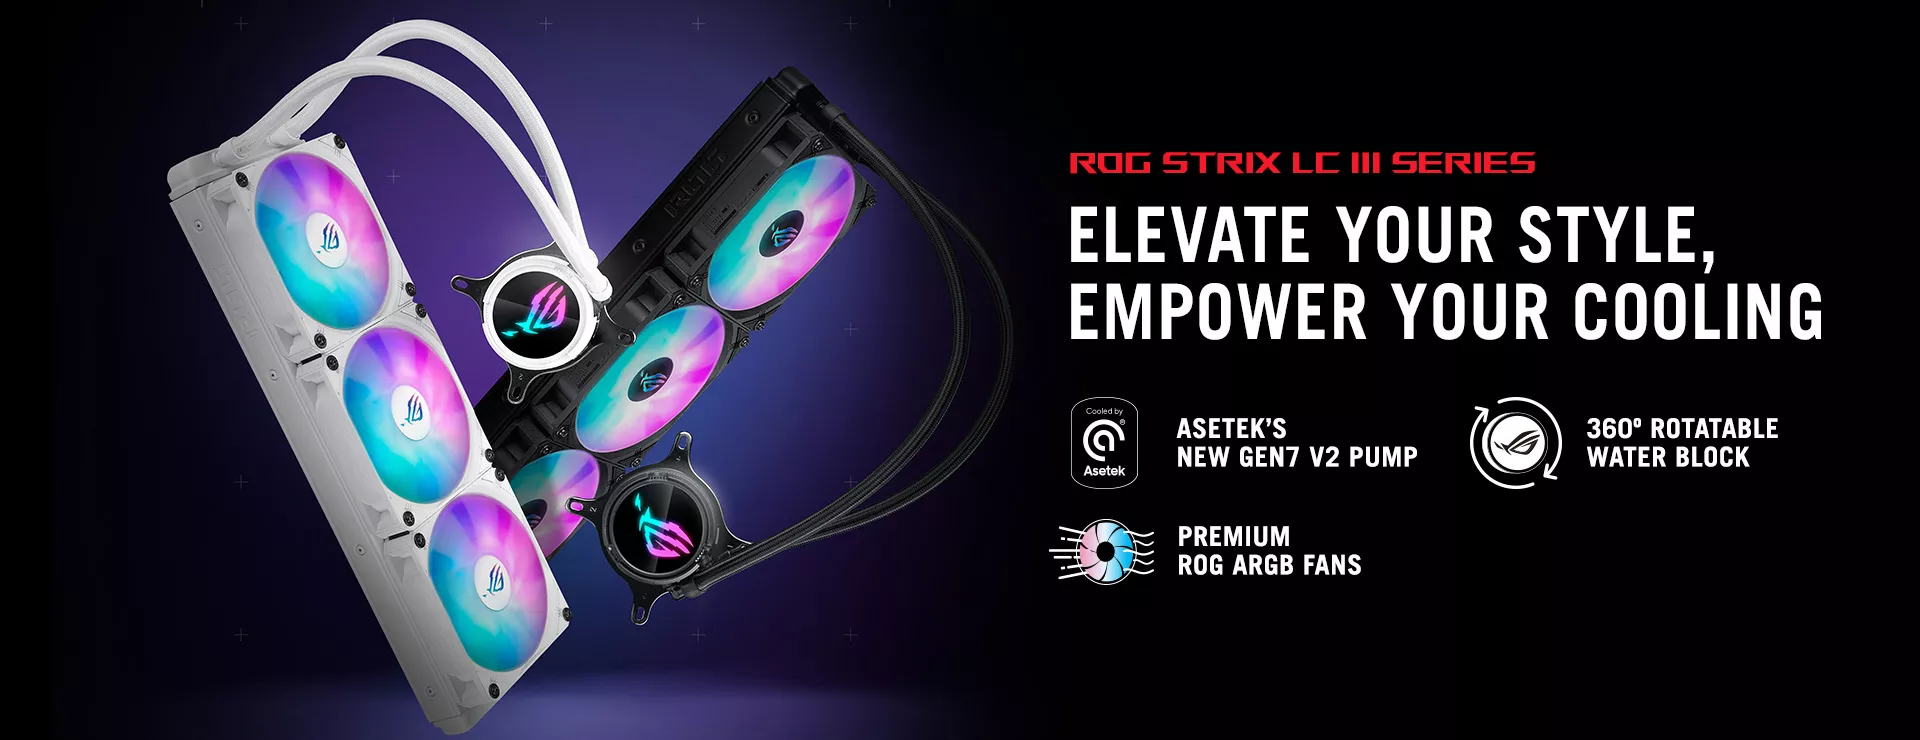 The ROG Strix LC III 360 ARGB AIO coolers float and intertwine in mid-air, accompanied by a dazzling background, showcasing the ultimate aesthetics of the product.